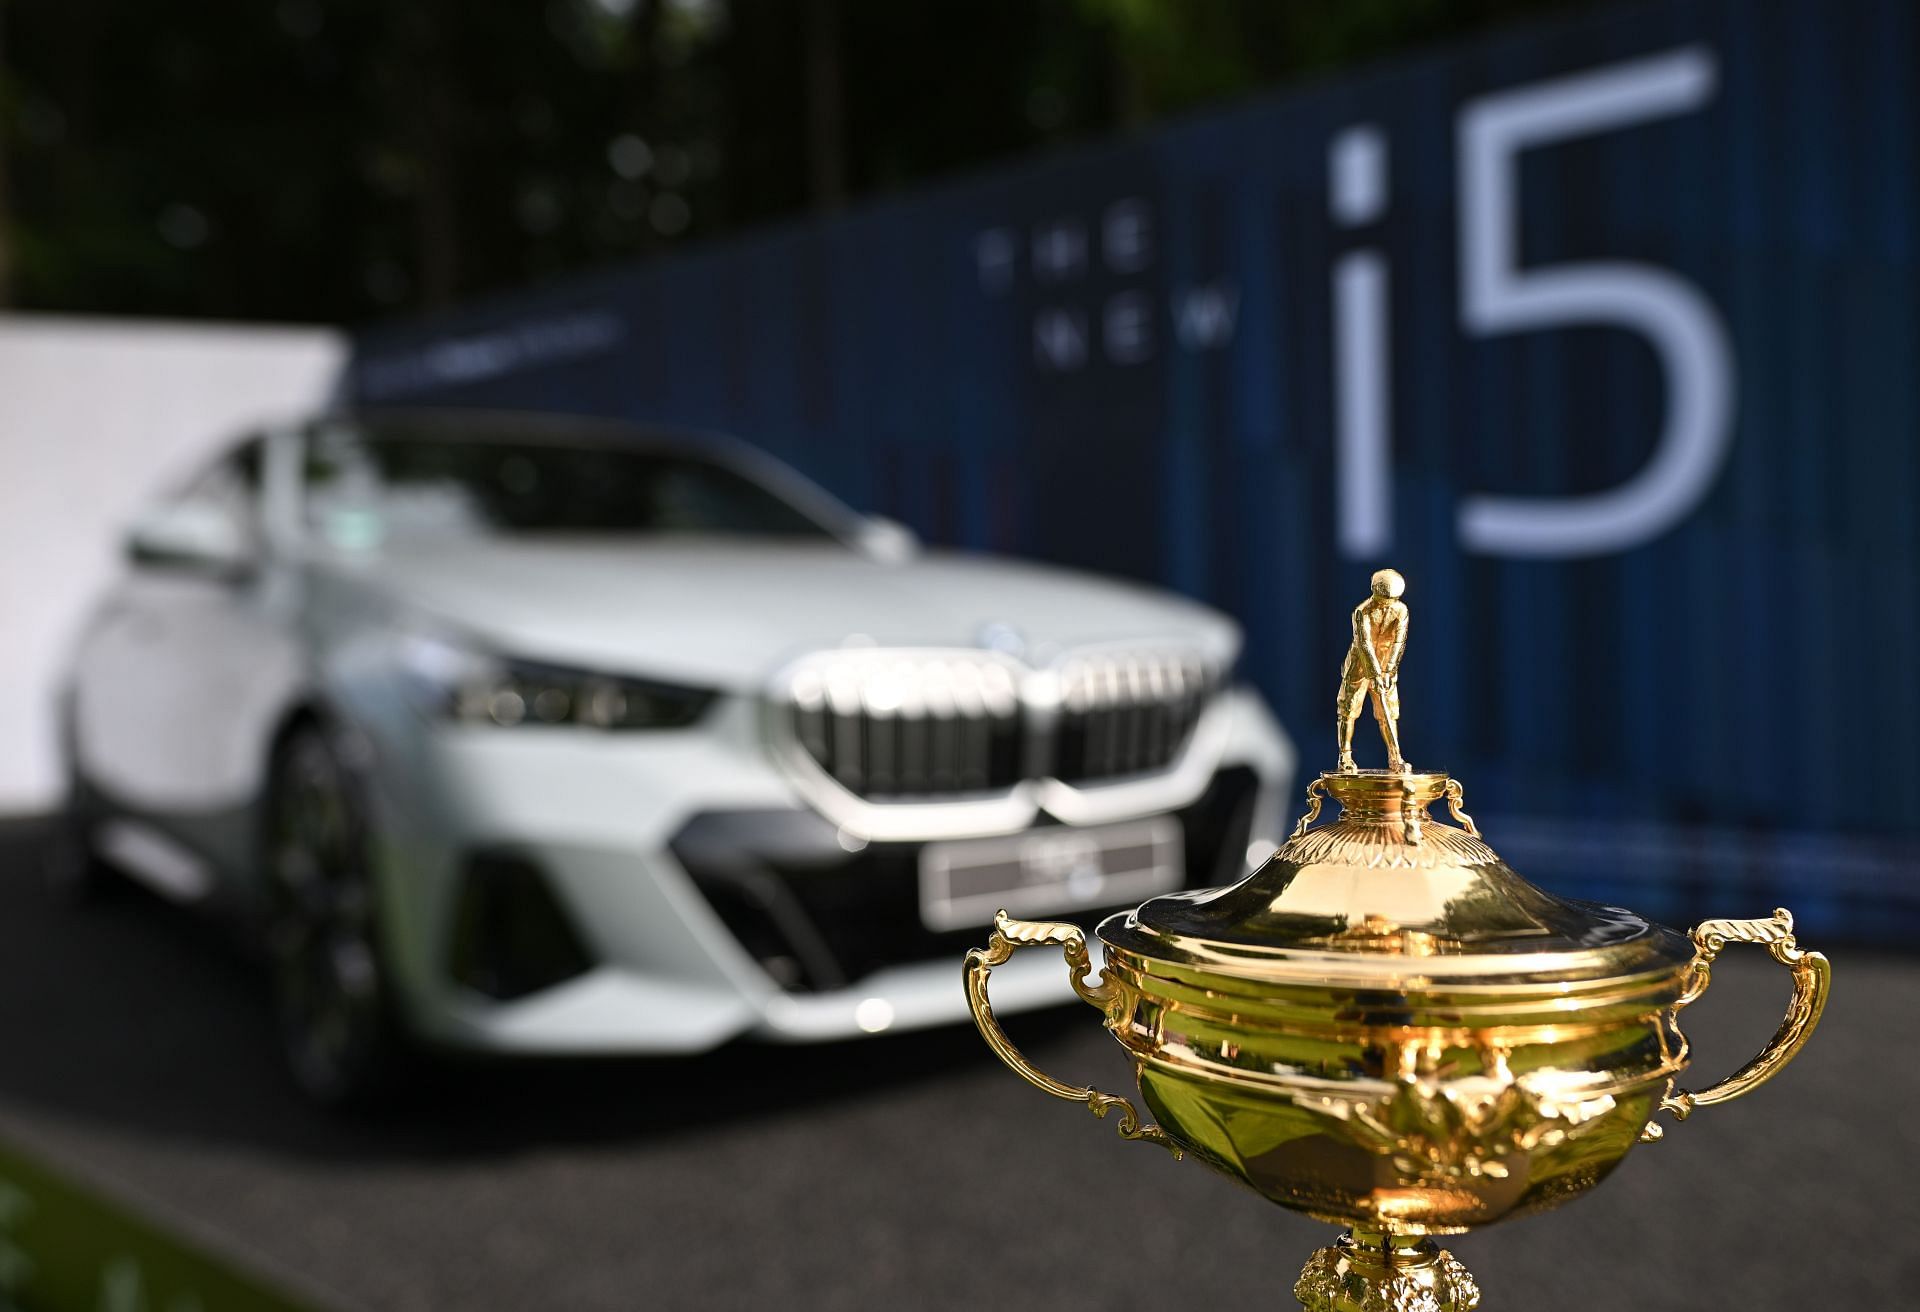 The Ryder Cup trophy is pictured in front of a BMW car during the pro-am prior to the BMW International Open at Golfclub M&uuml;nchen Eichenried, Germany